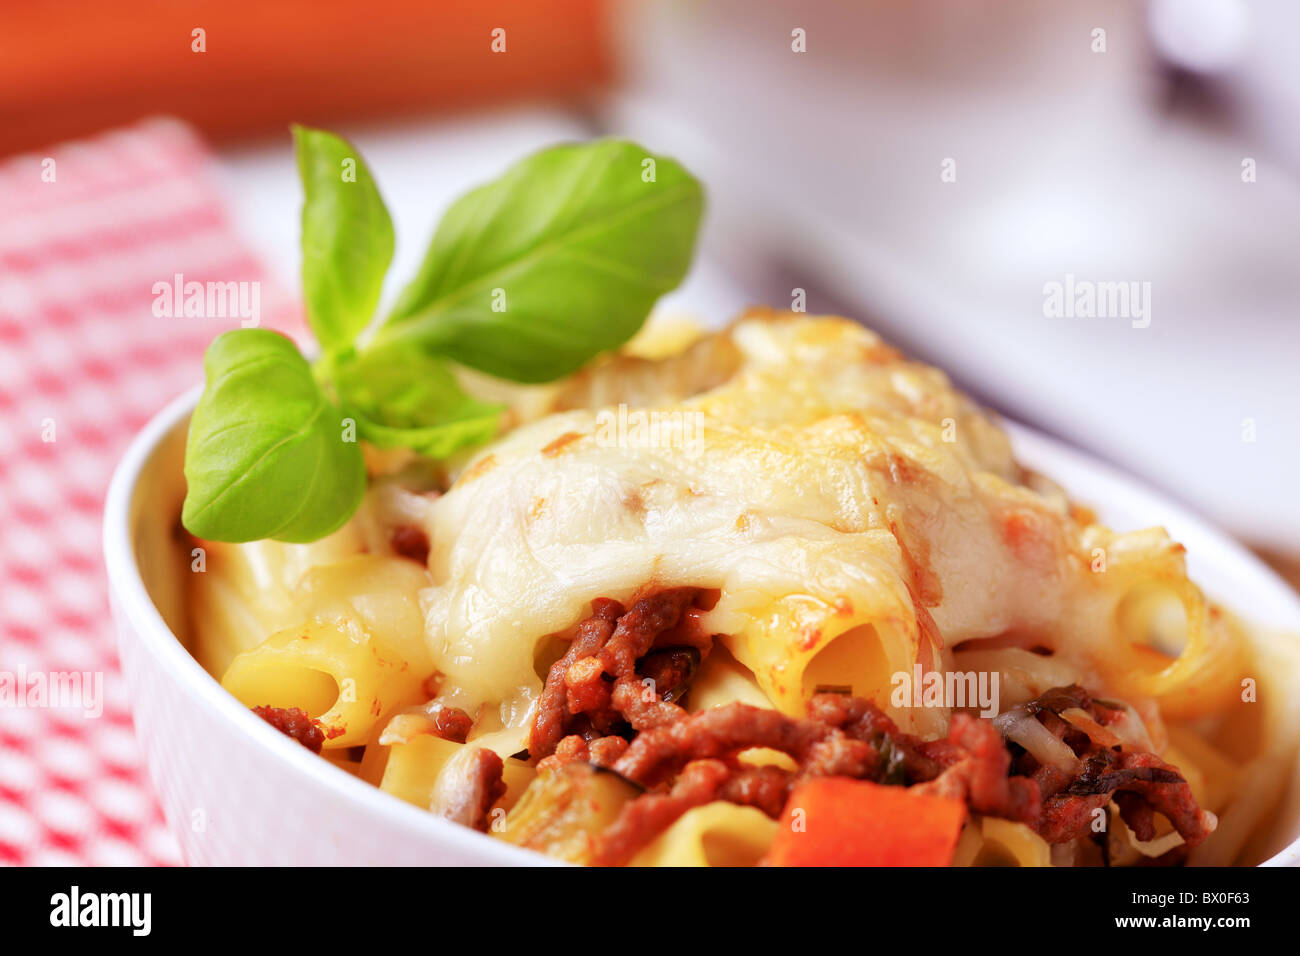 Rigatoni with Bolognese sause and cheese Stock Photo